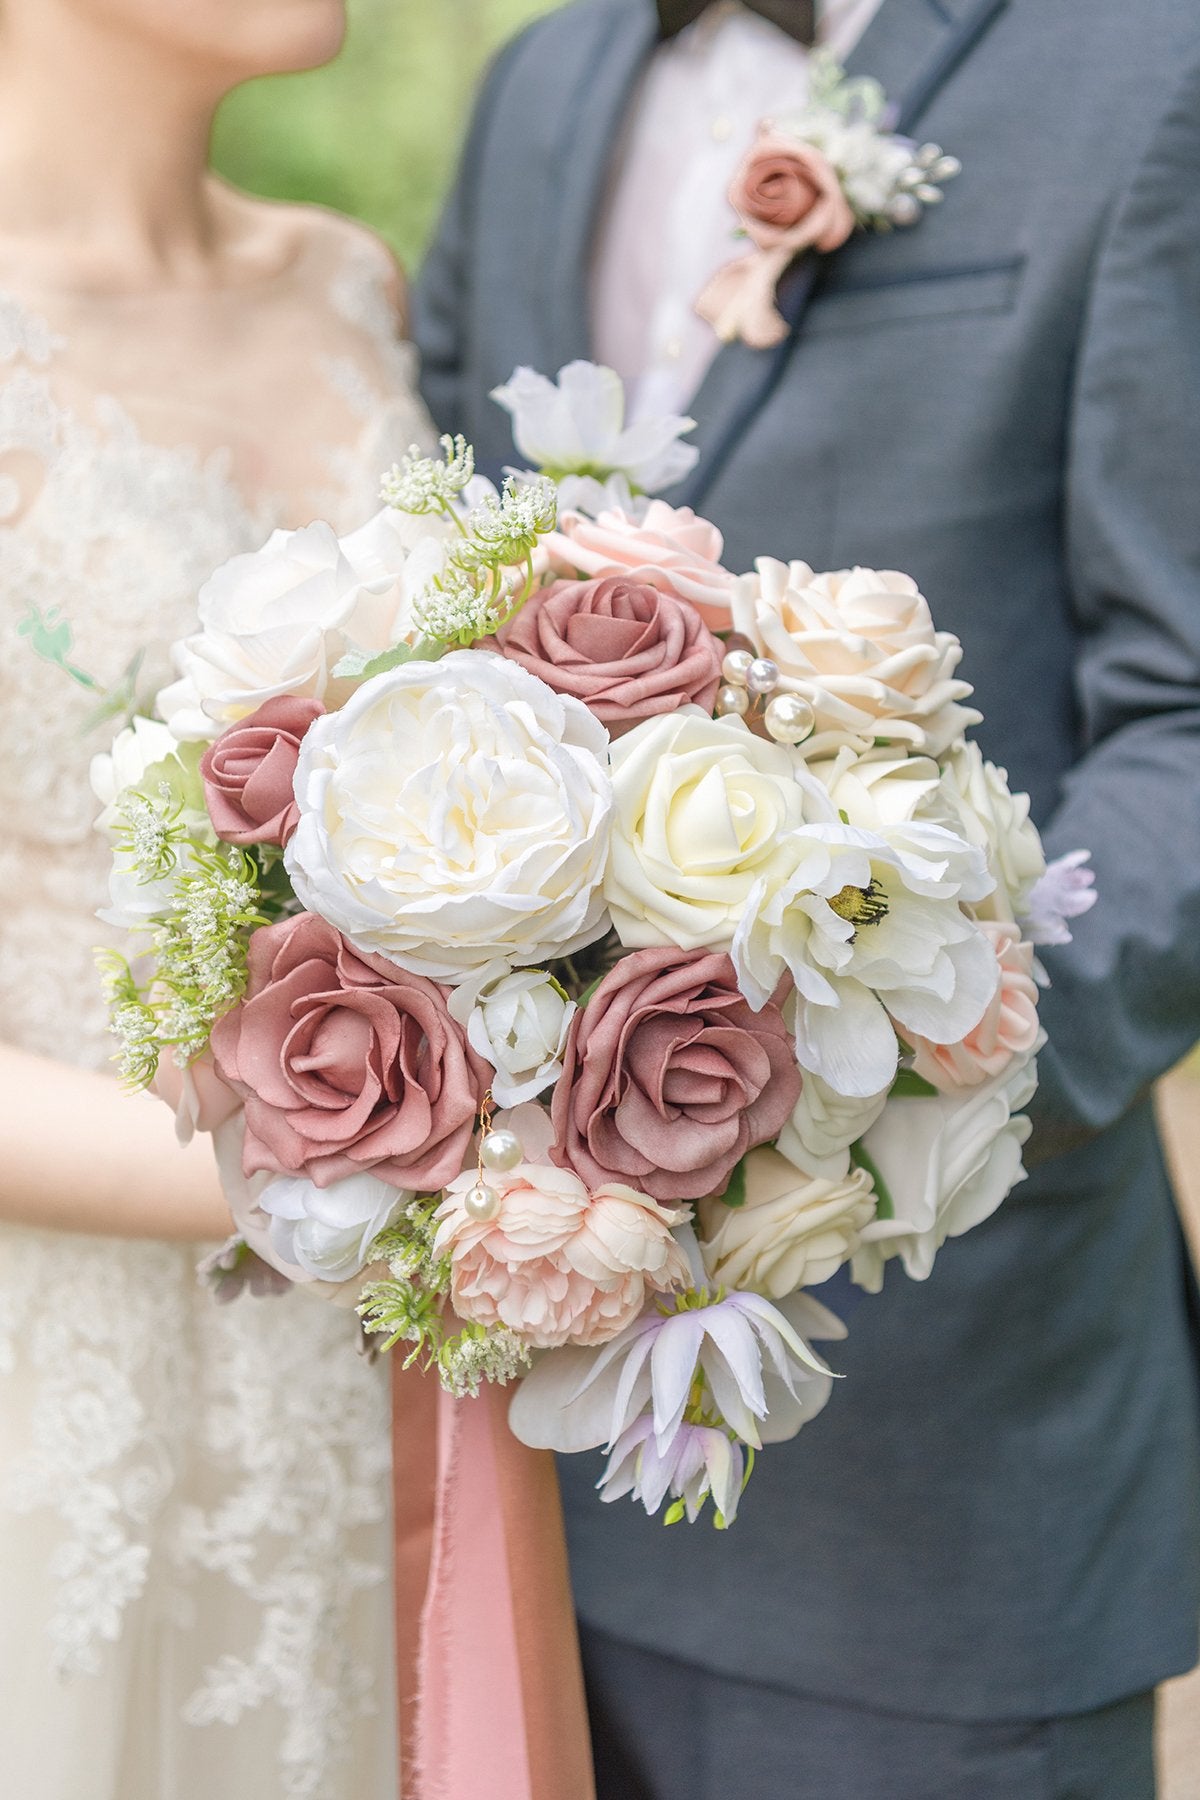 Dusty Rose & Cream Personal Flowers Pre-arranged Package | Bouquets + Wrist Corsages + Boutonnieres